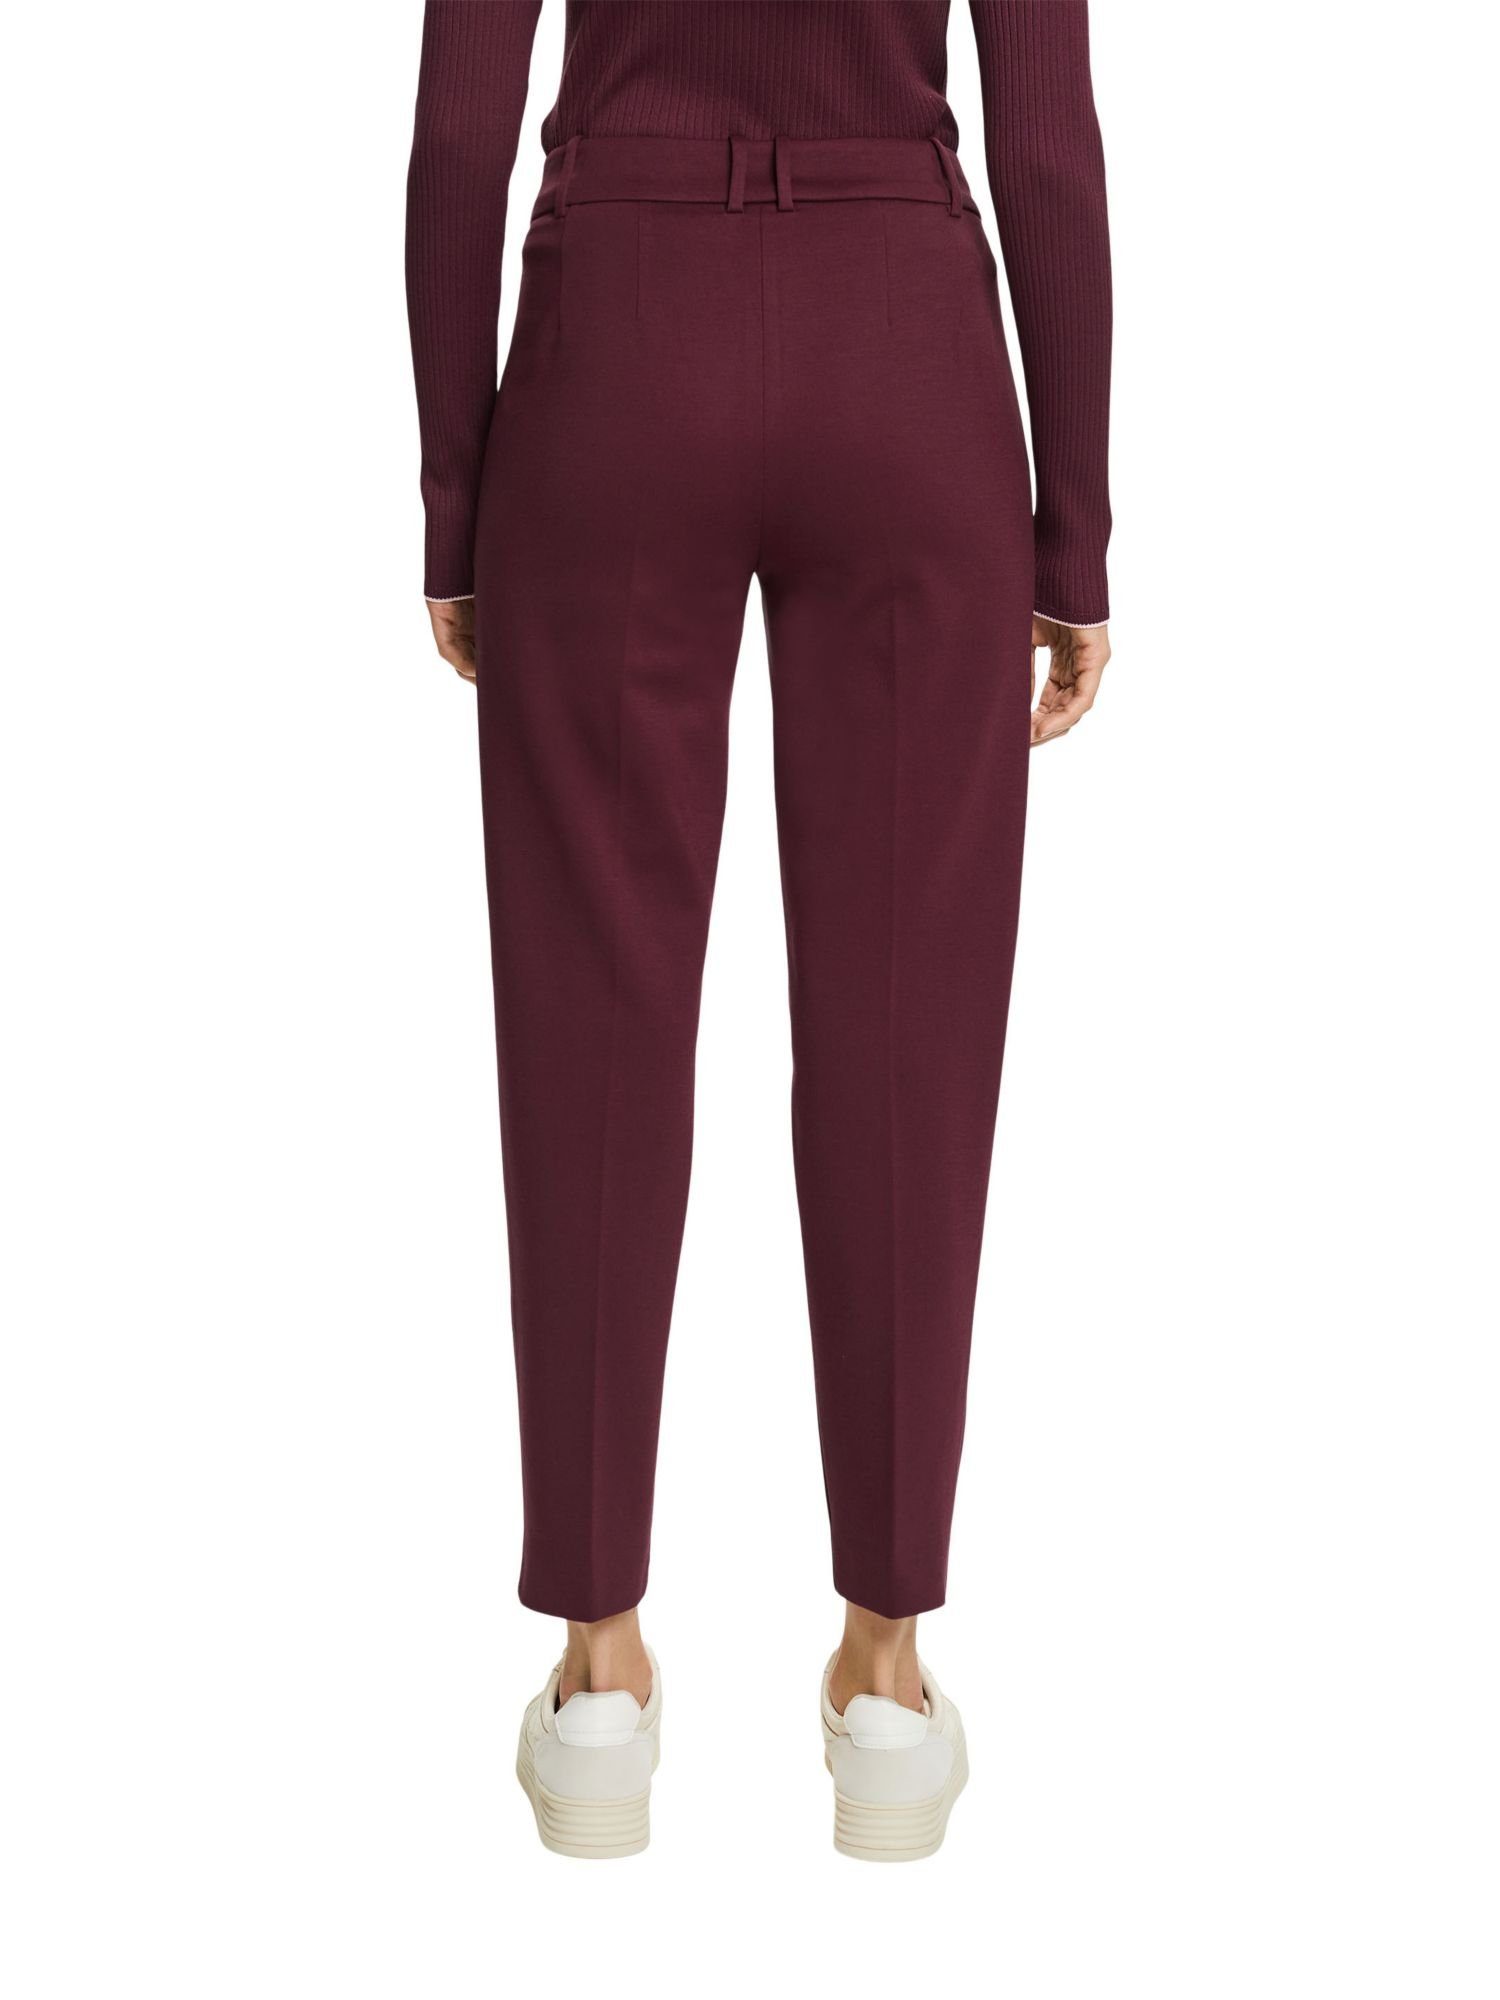 SPORTY Pants Stretch-Hose Mix Tapered AUBERGINE Match Collection & Esprit PUNTO